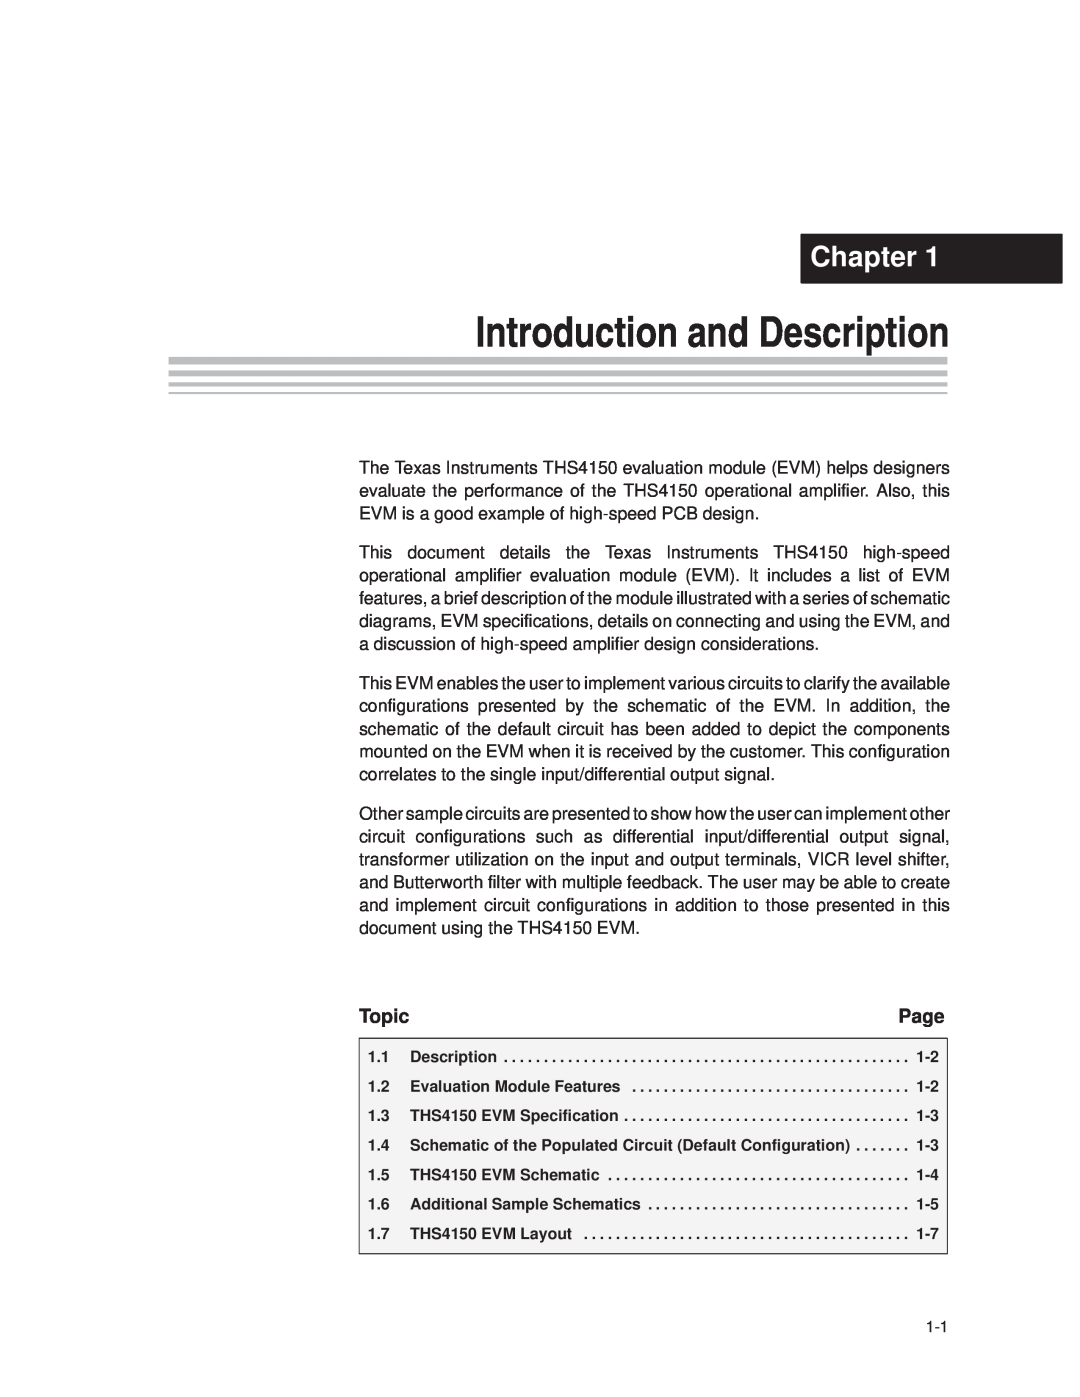 Texas Instruments THS4150 manual Introduction and Description, Chapter, Page, Topic 